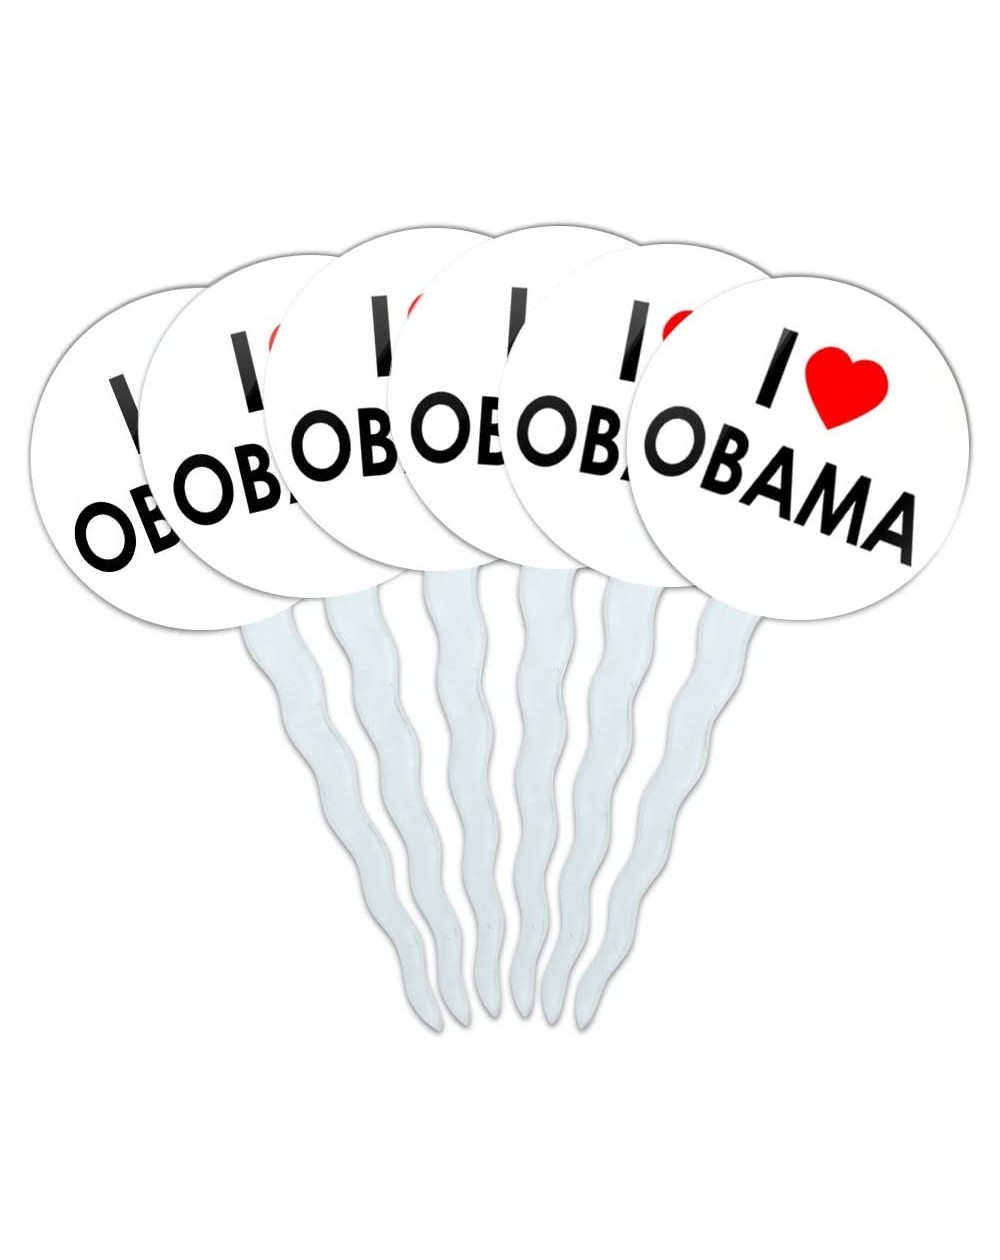 Cake & Cupcake Toppers Set of 6 Cupcake Picks Toppers Decoration I Love Heart - Obama - Obama - CD12J8HCL31 $7.41